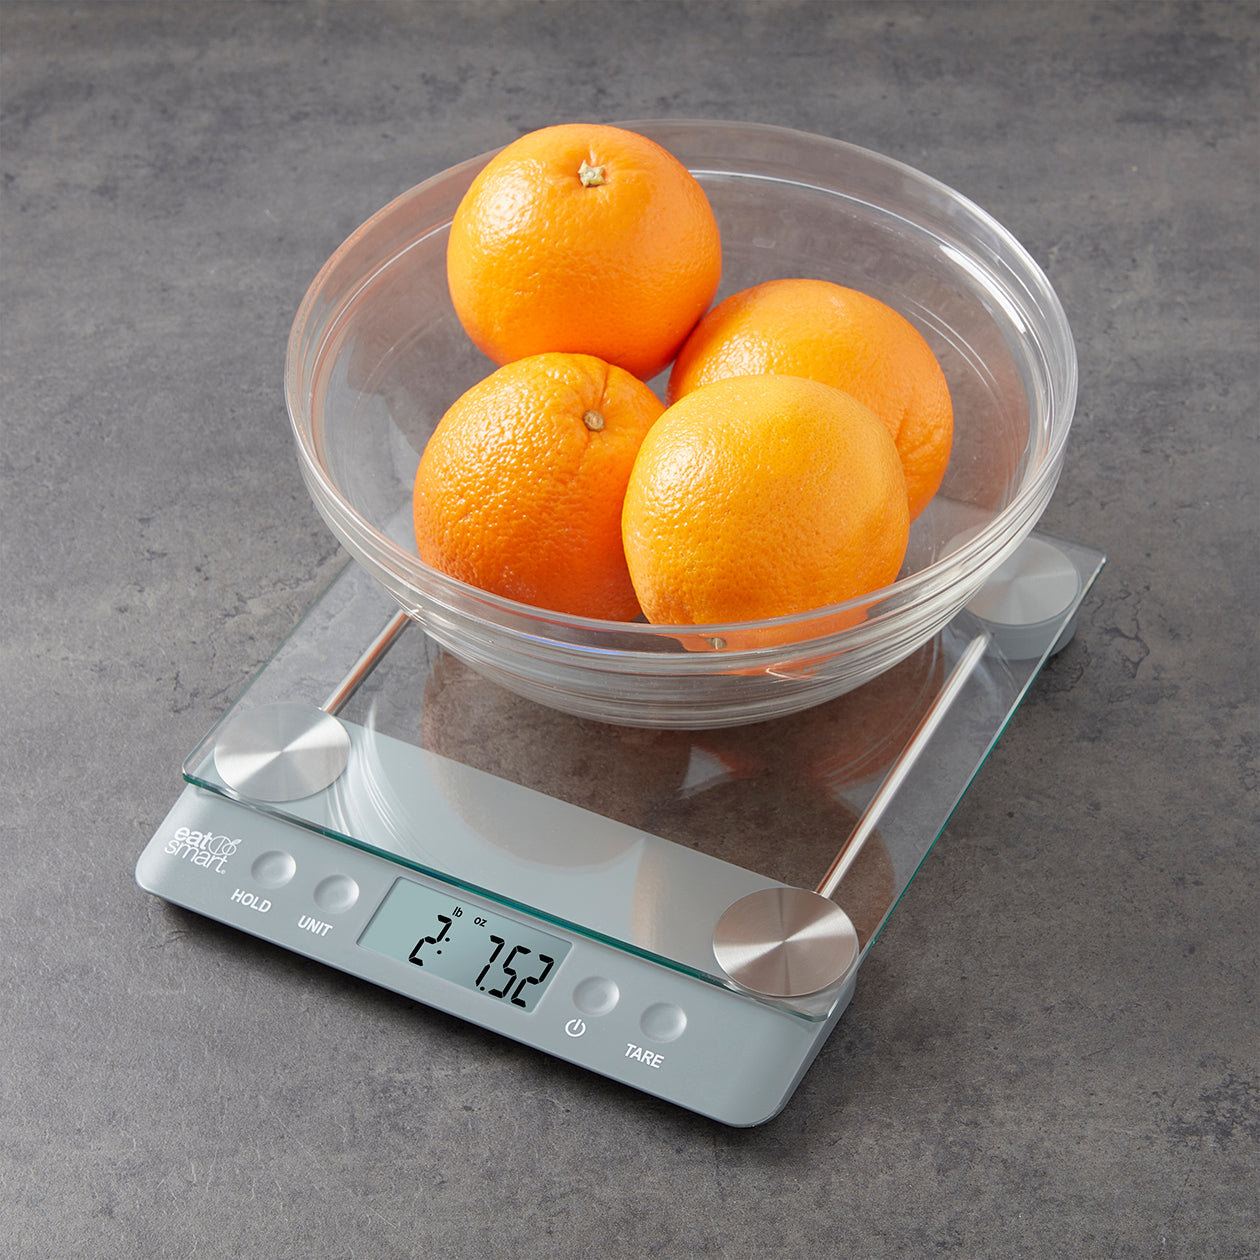 A MUST HAVE for Every Kitchen: The EatSmart Precision Elite